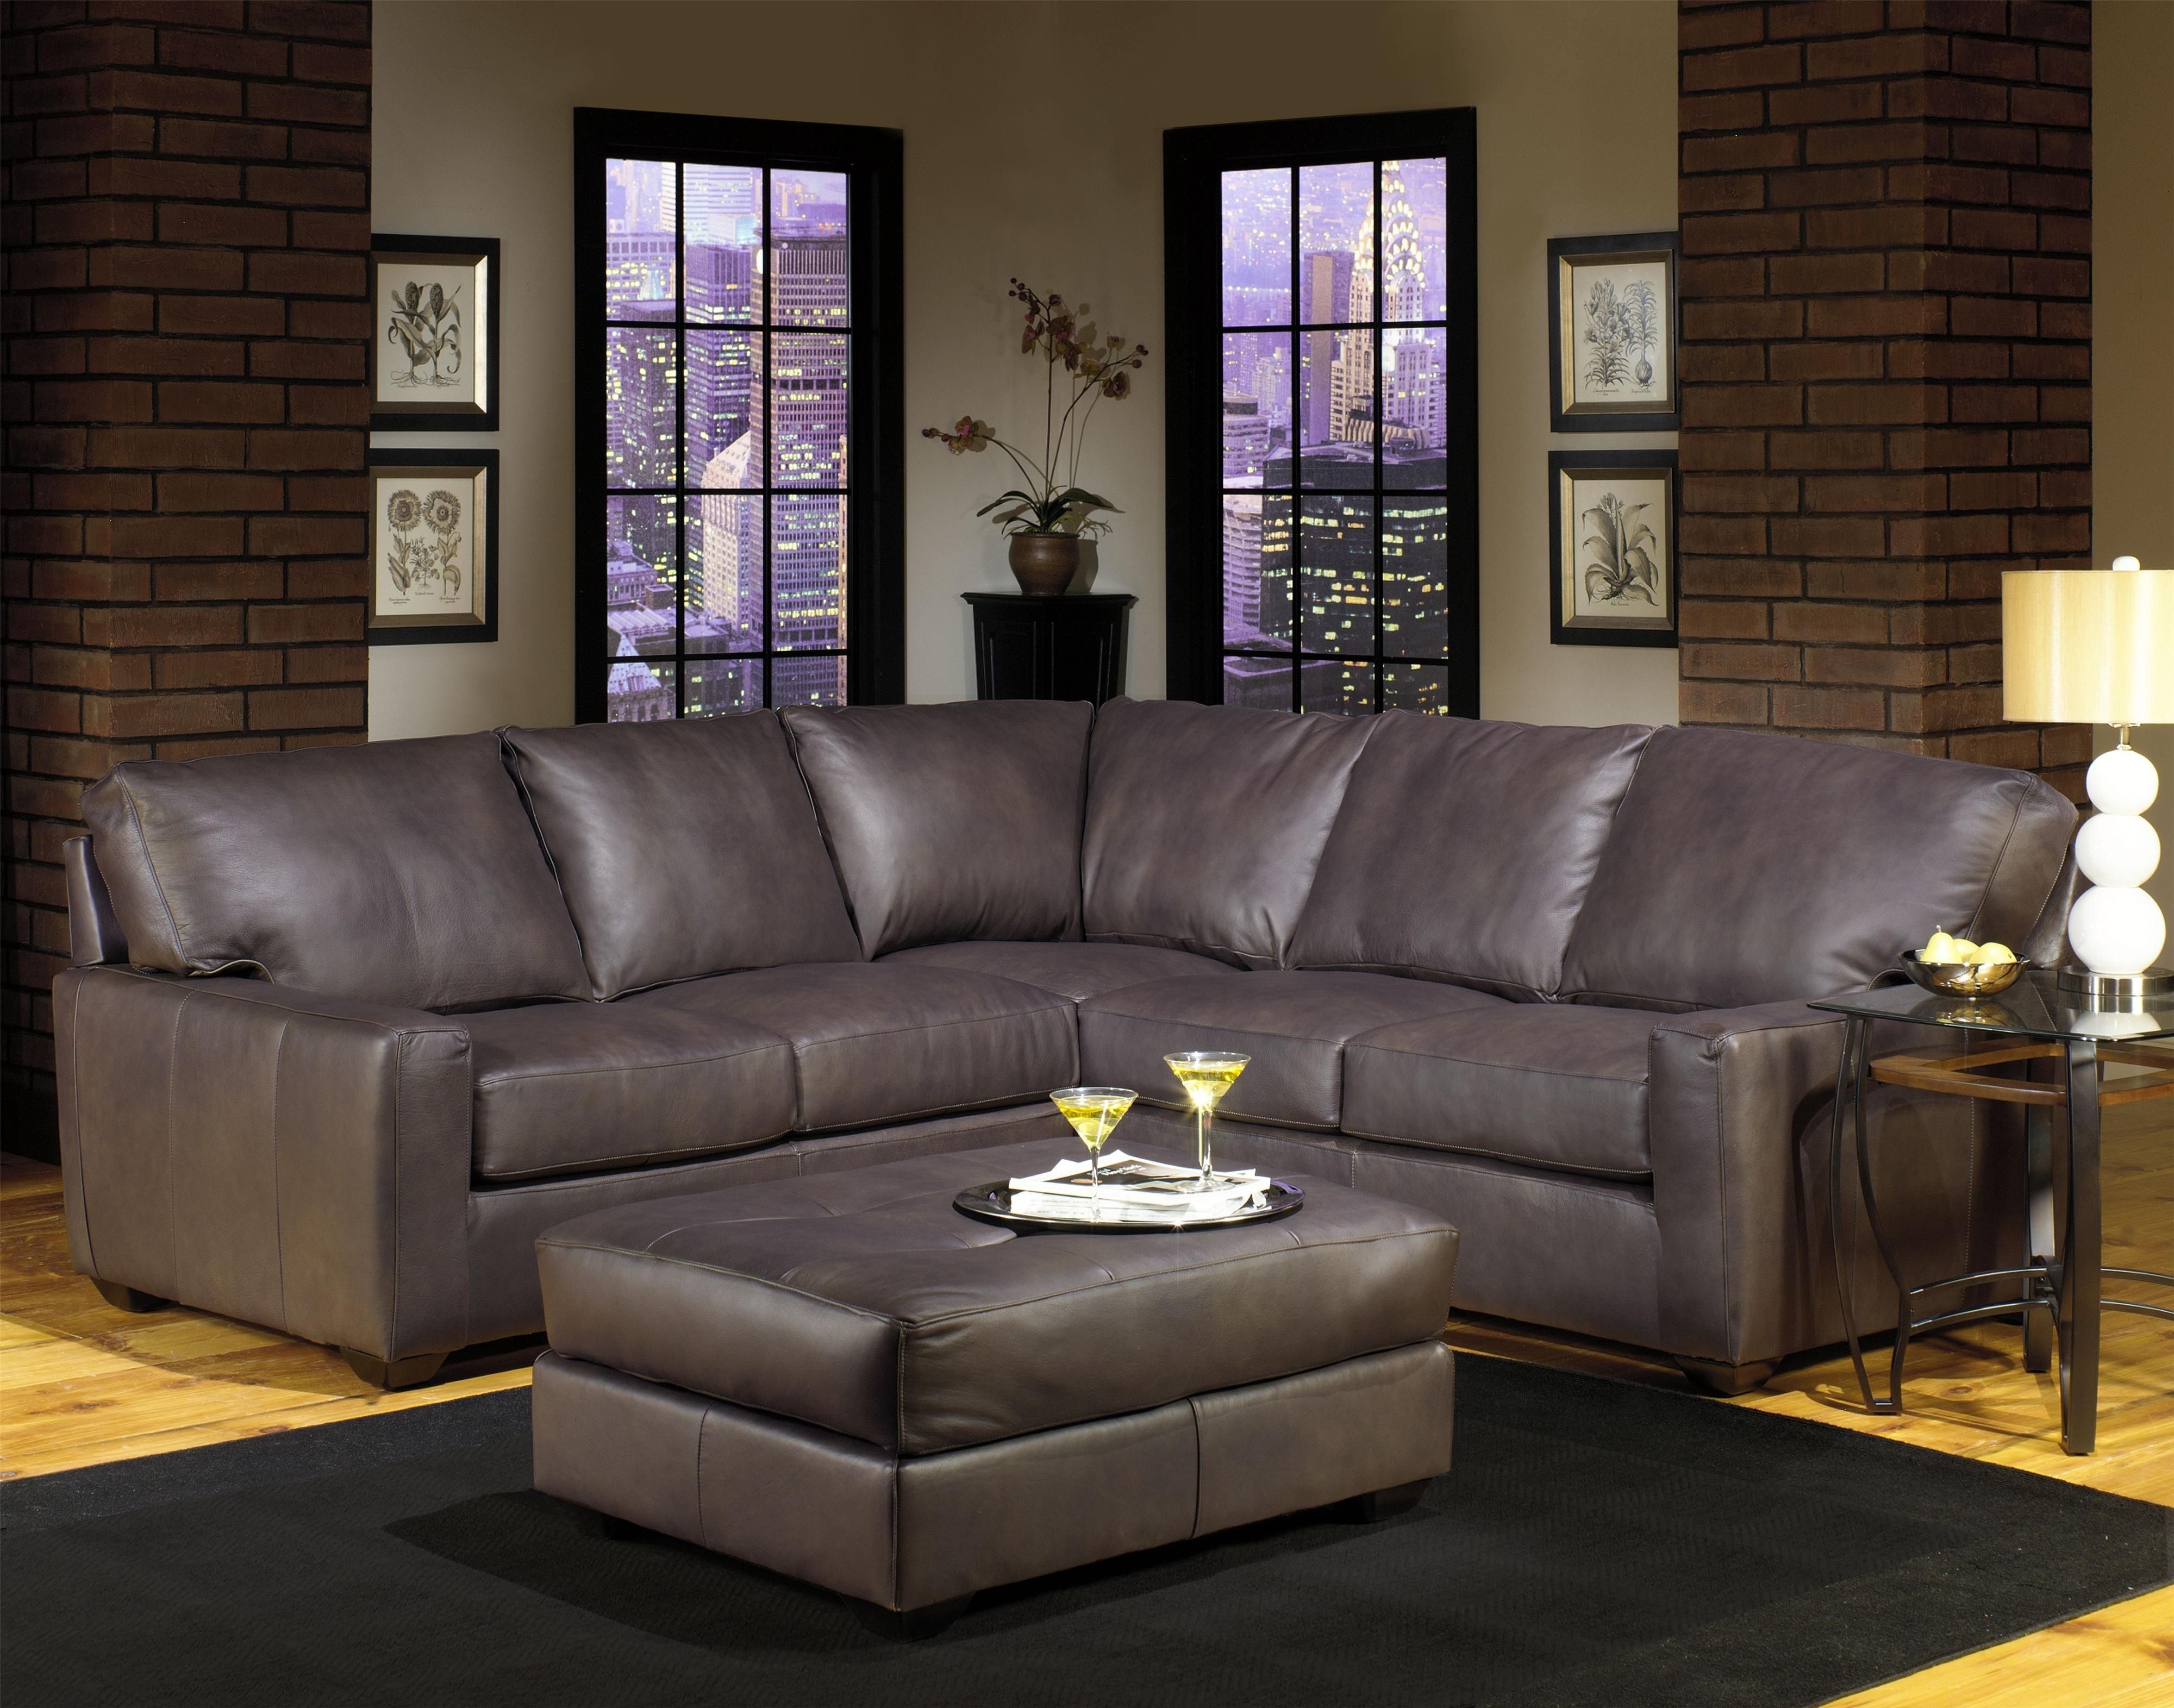 Usa Premium Leather Sectionals | Bellingham, Ferndale, Lynden, And Regarding Blaine 3 Piece Sectionals (View 21 of 25)